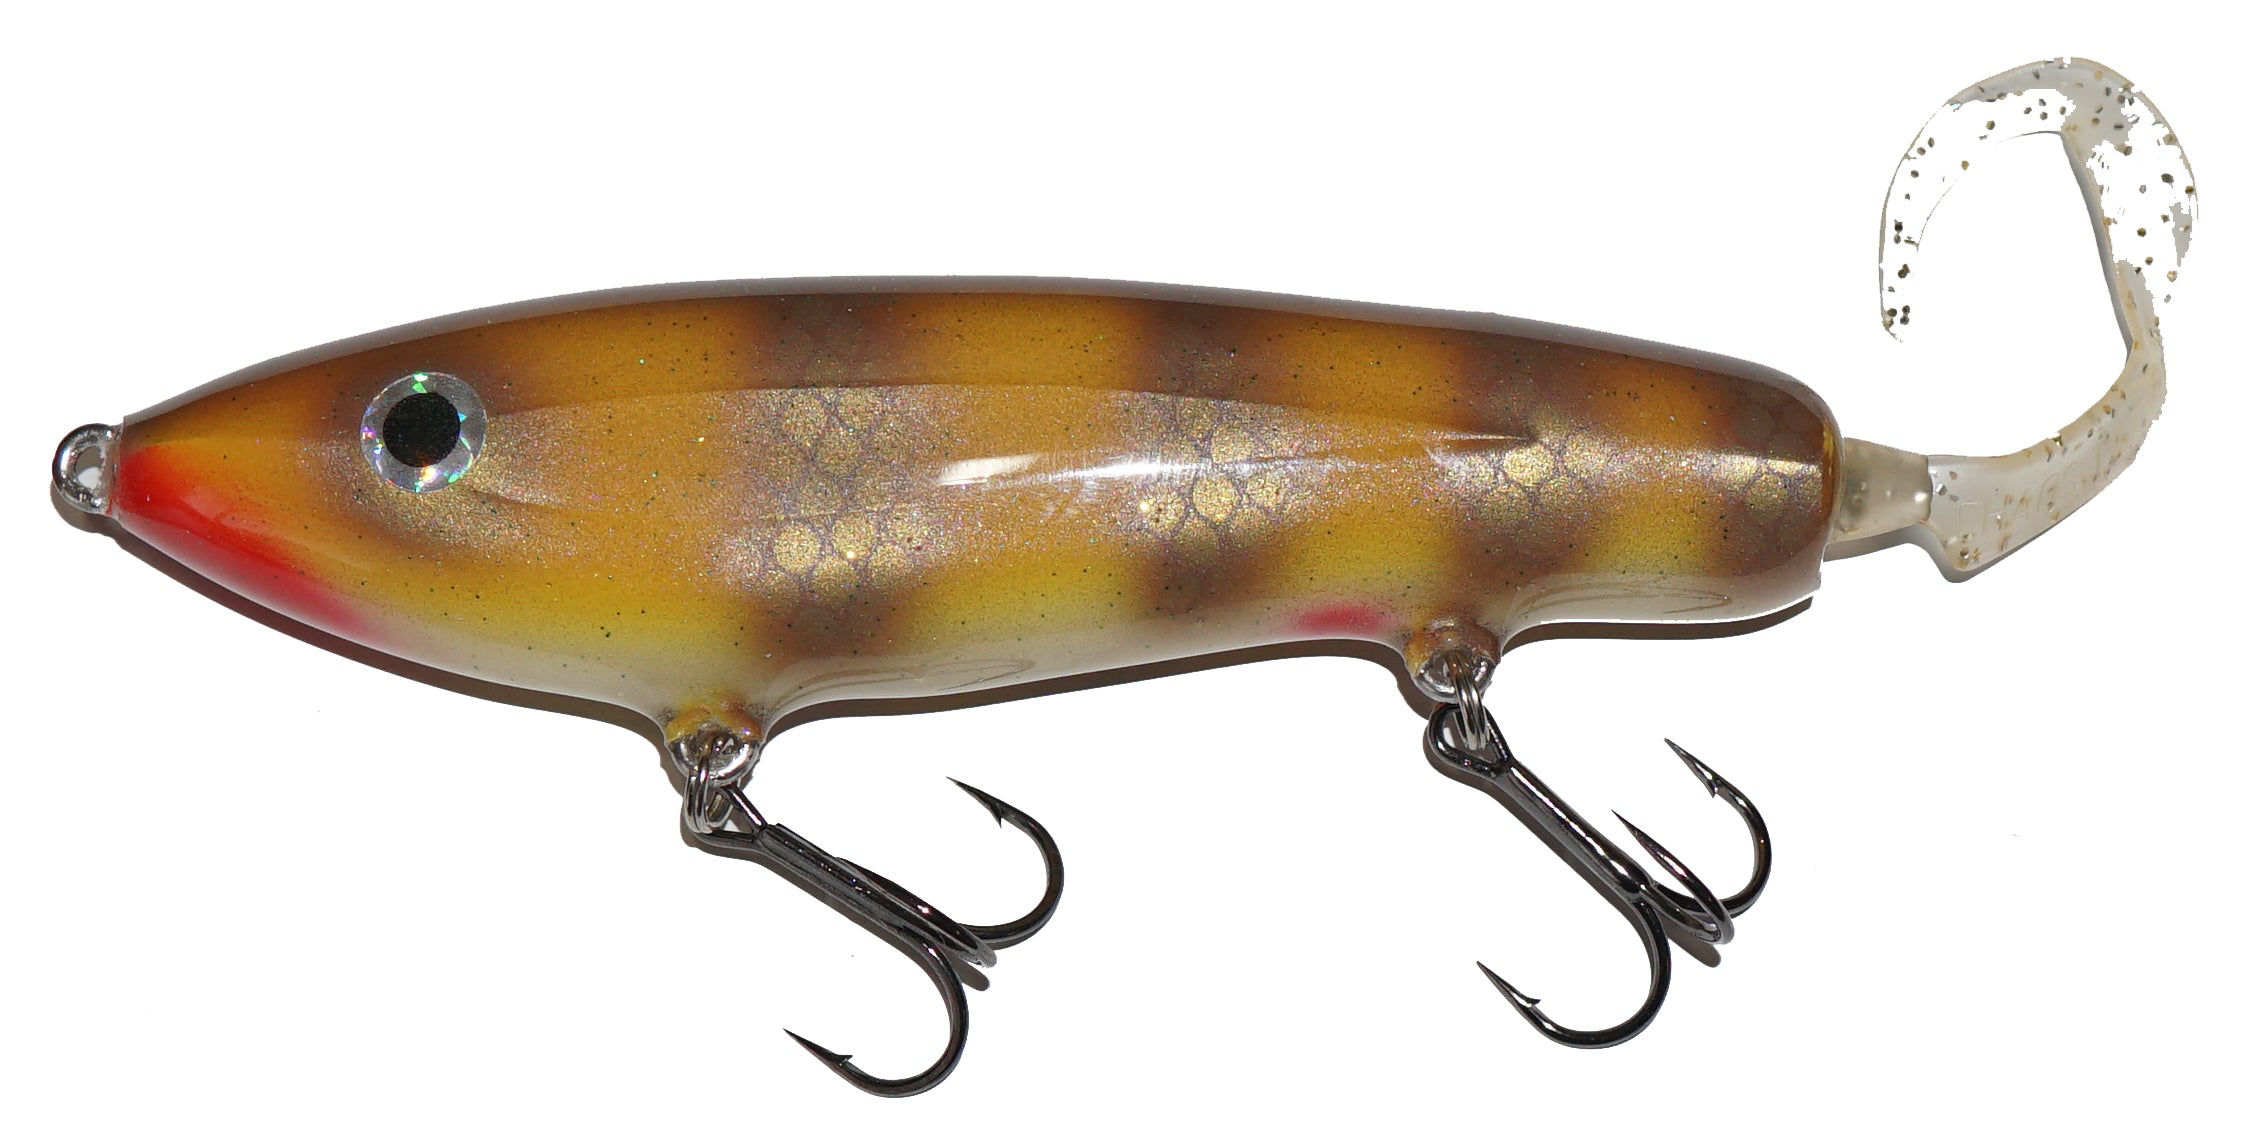 Chaos Tackle Shum Quickie Glide Bait